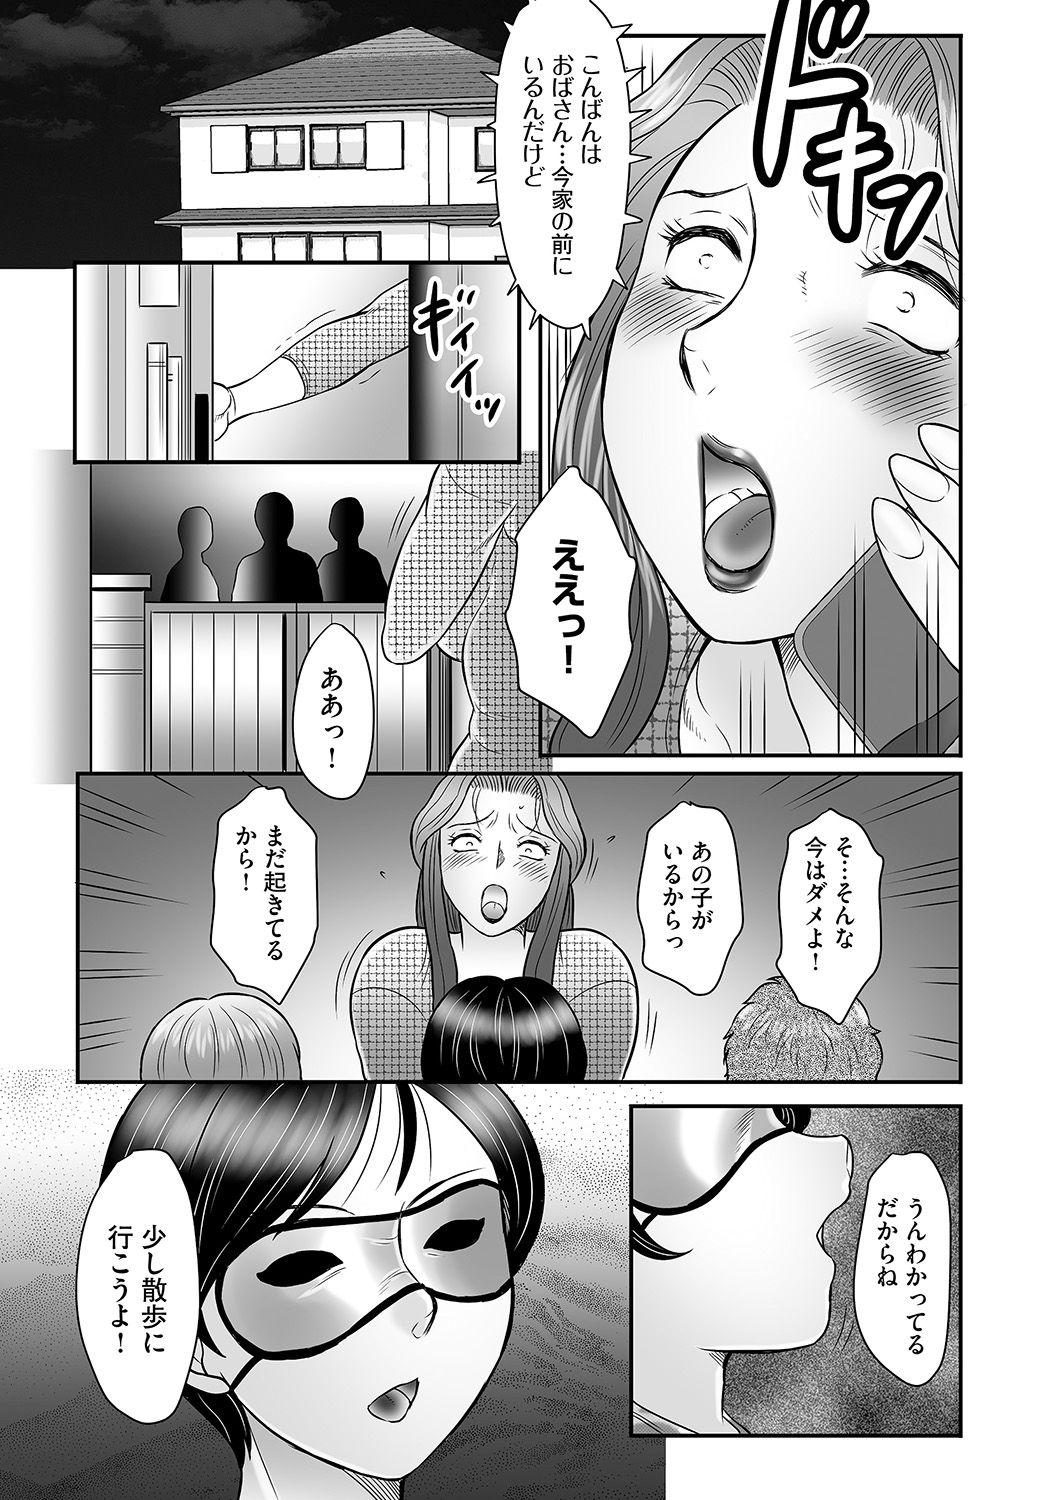 Group Boshi no Susume - The advice of the mother and child Ch. 15 Transexual - Page 11